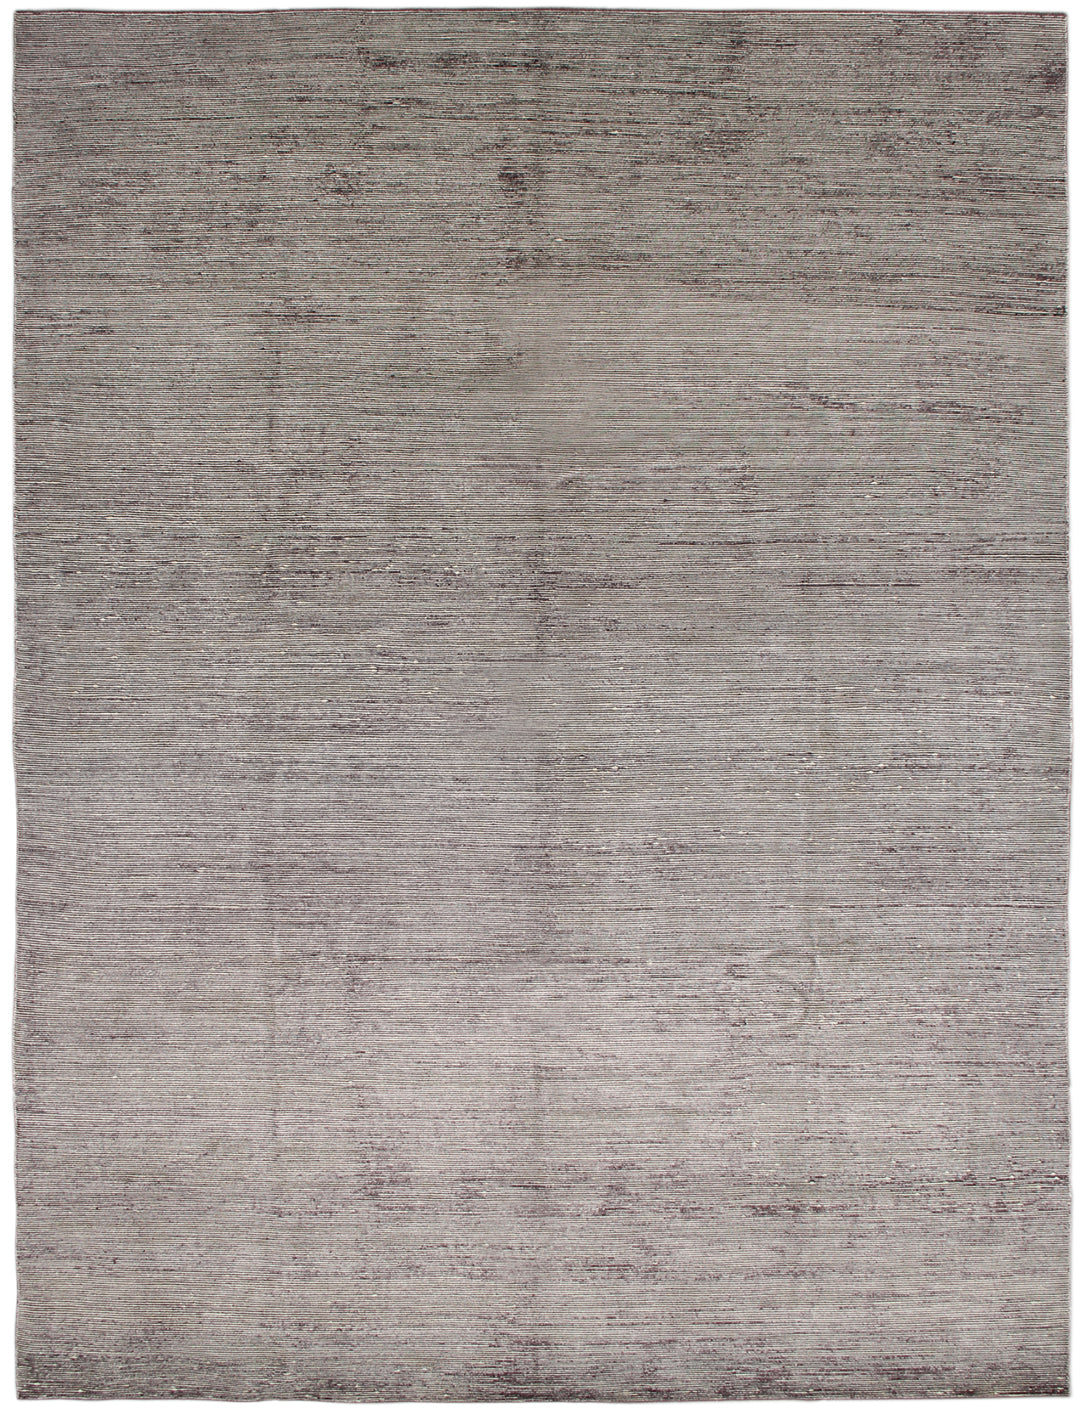 9'x12' Brown and White Cut and Loop Contemporary Modern Design Indian Rug